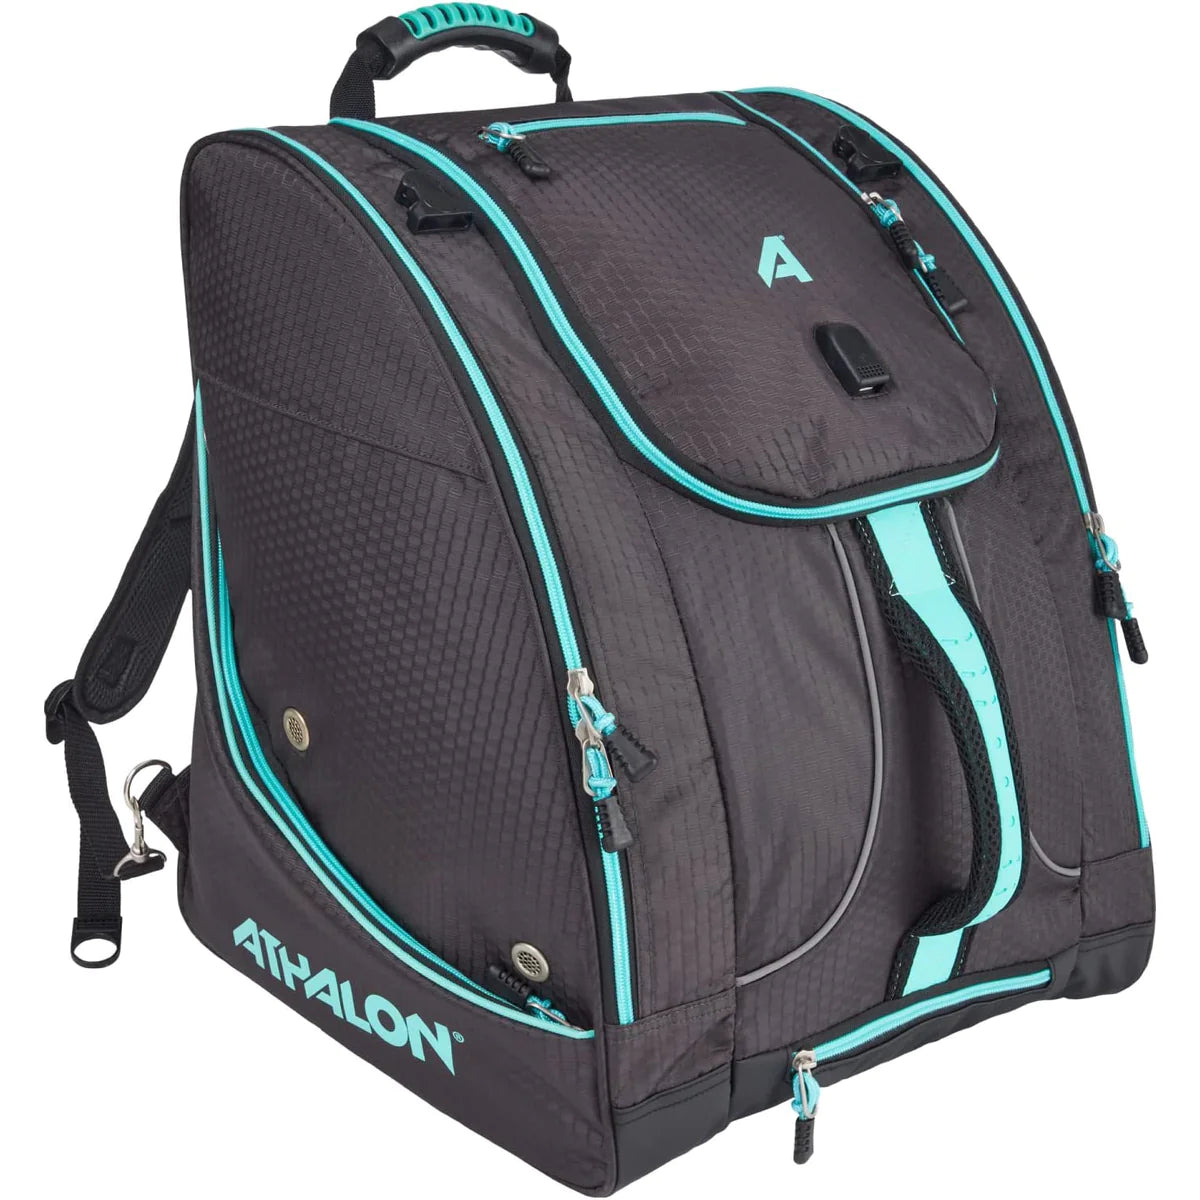 Athalon LTD Deluxe Everything USB Ski Boot Bag - 332 BAGS Athalon Charcoal / Mint  